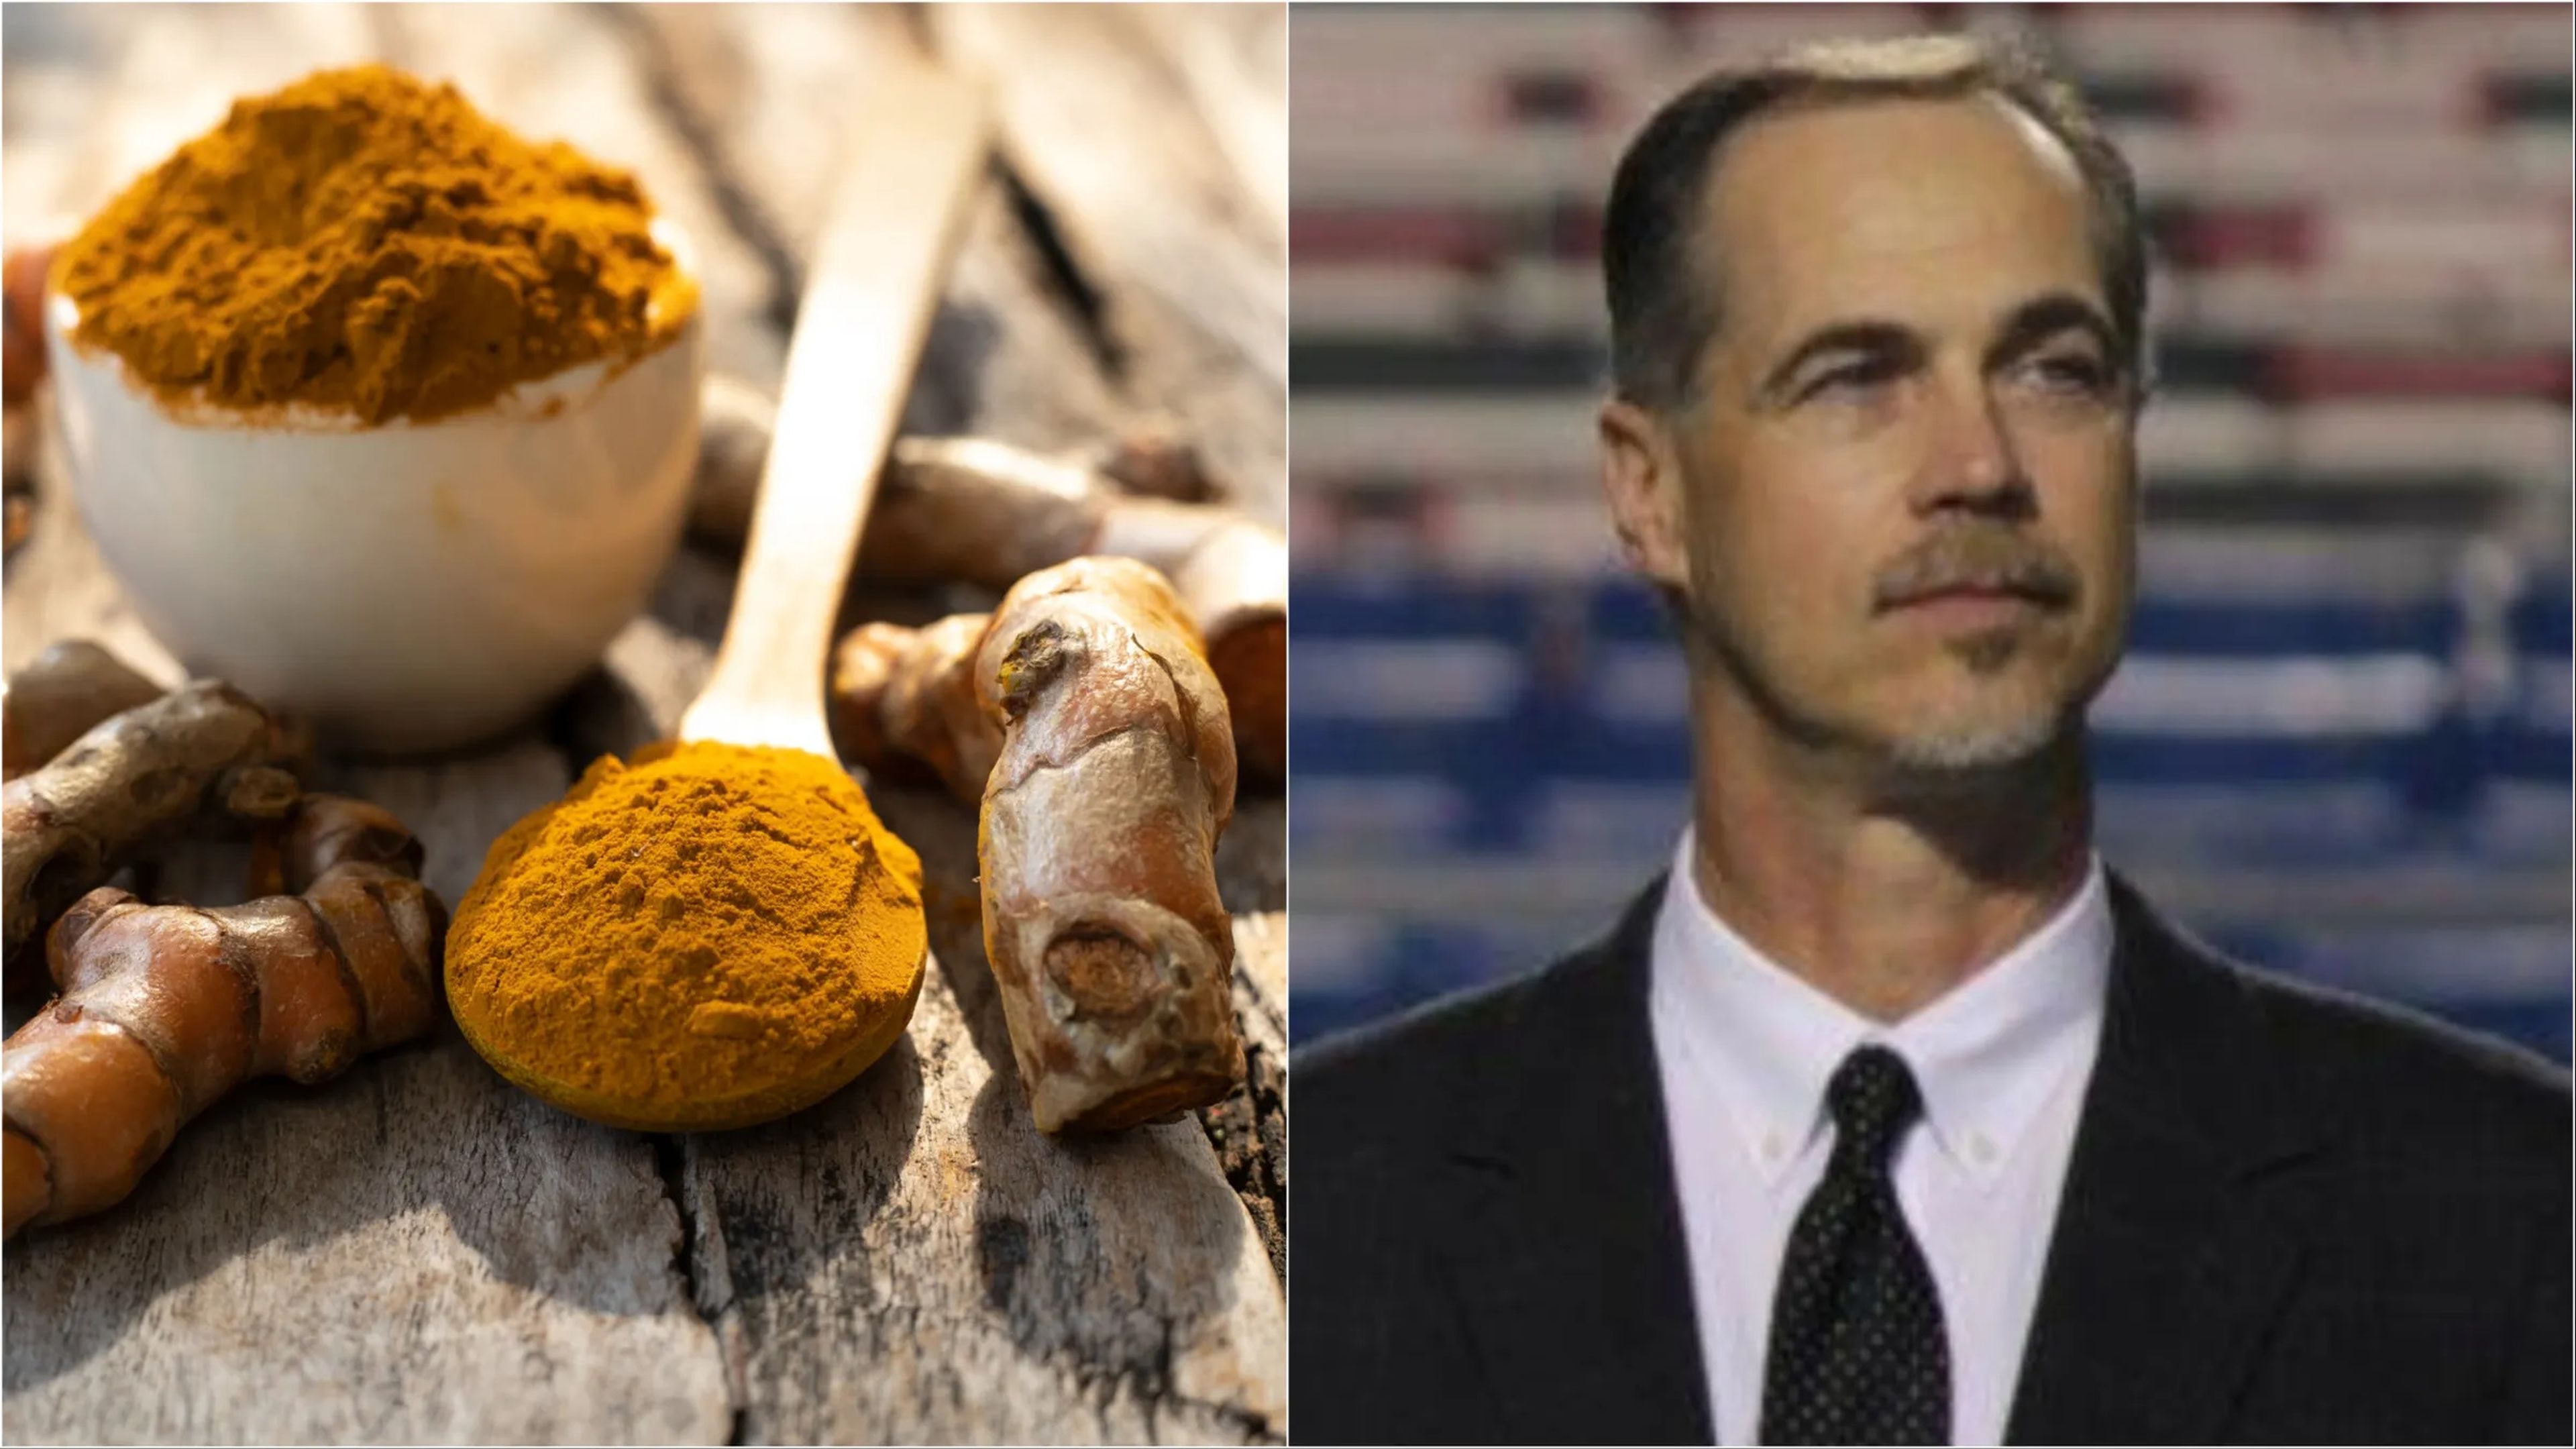 Turmeric powder (left) displayed in a bowl and on a spoon. Dr. Bill Gurley (right) wears a suit and tie. 